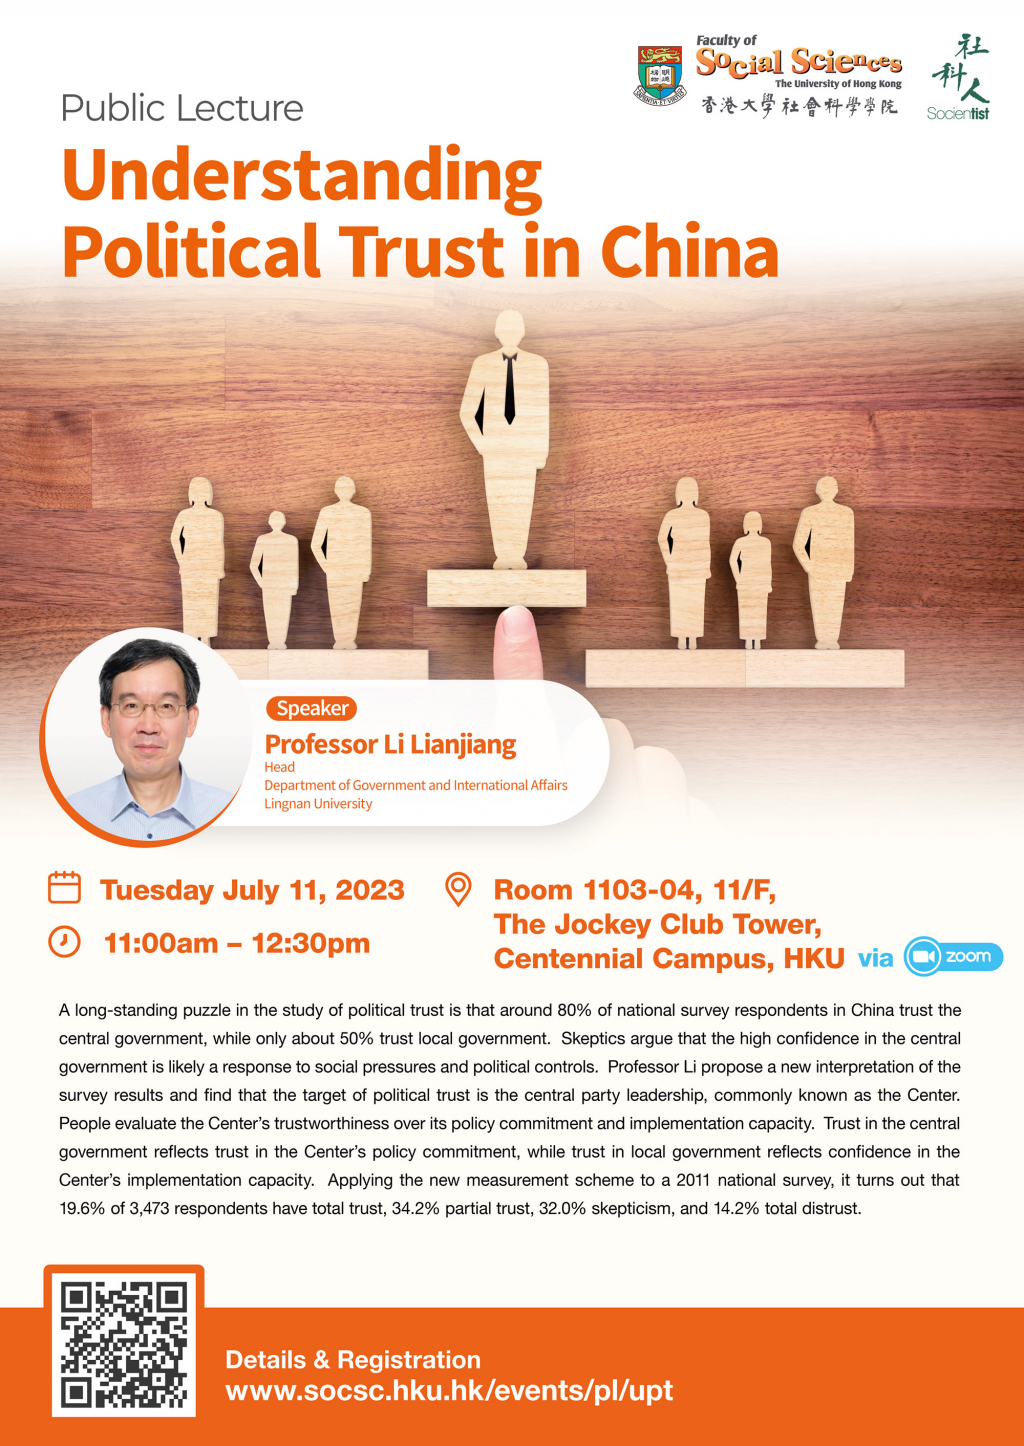 Public Lecture on Understanding Political Trust in China